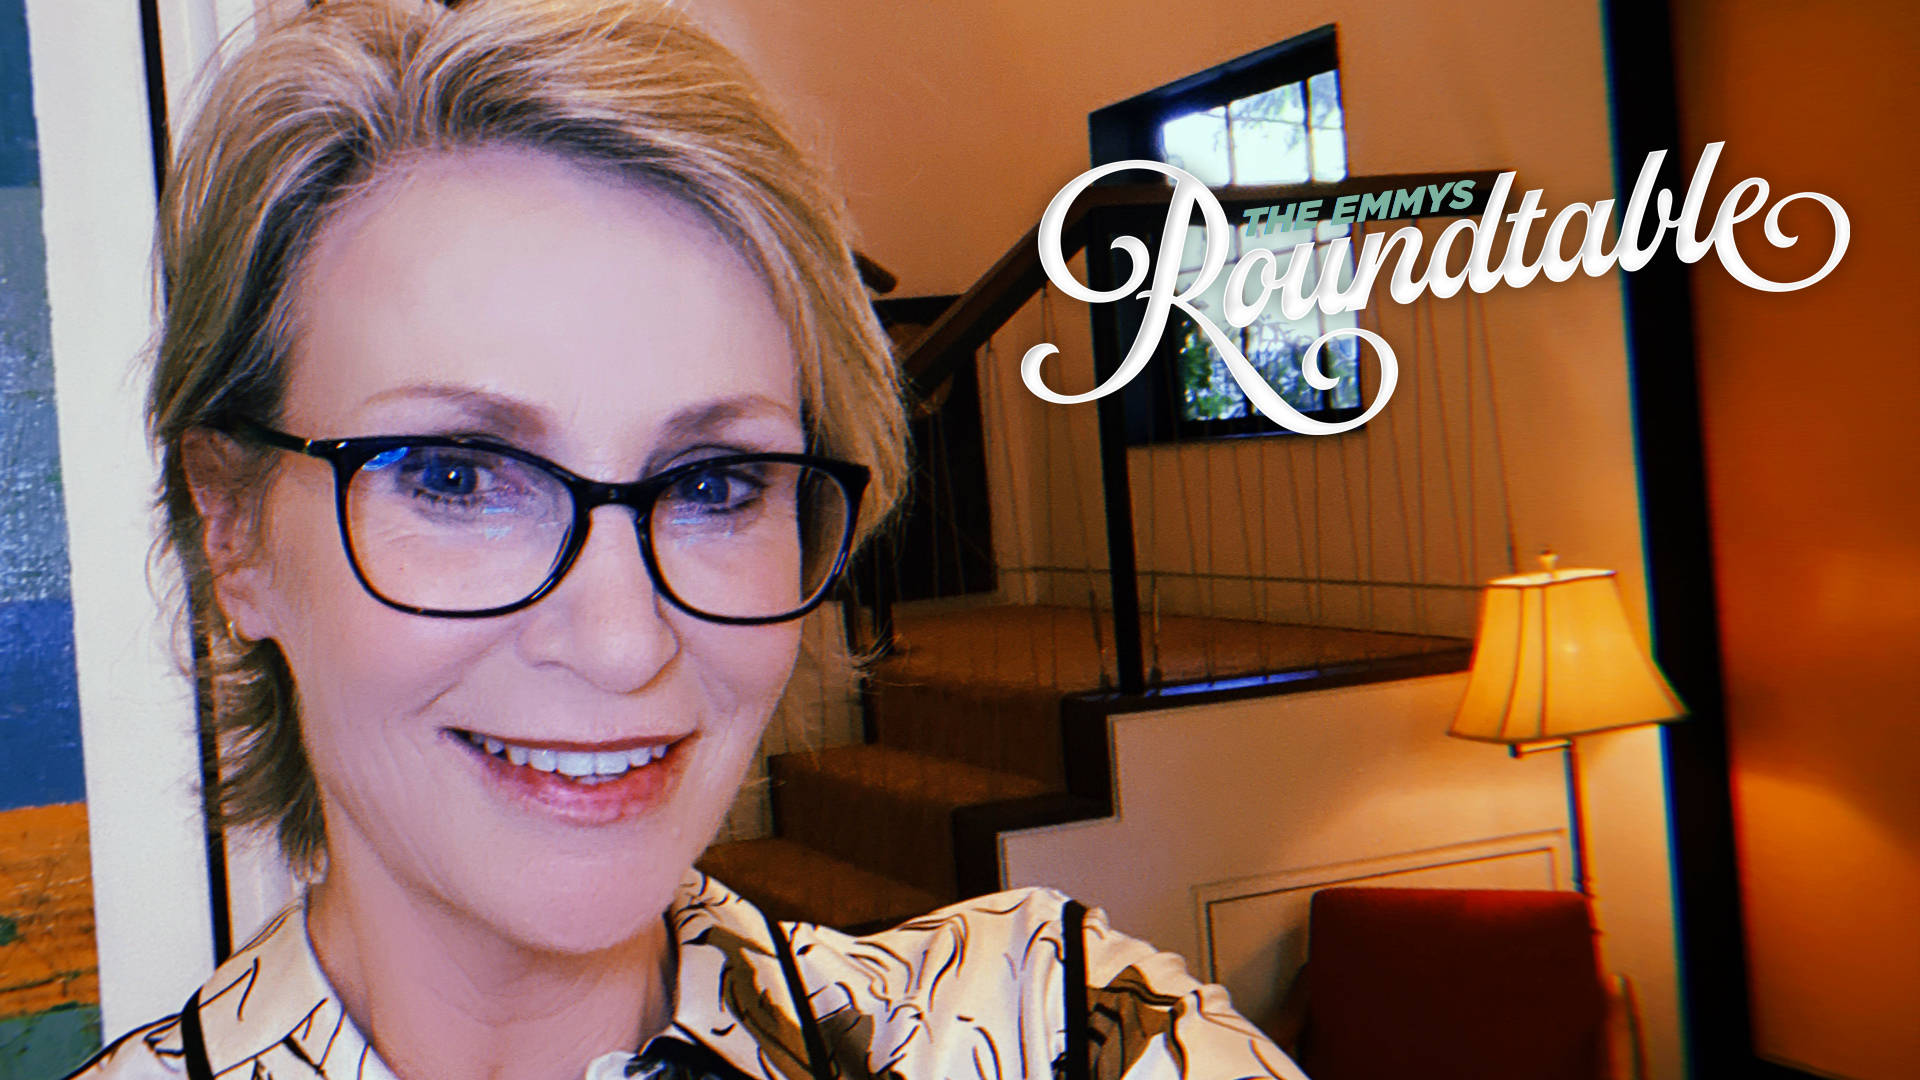 Jane Lynch Posing During The Emmys Roundtable Interview Wallpaper